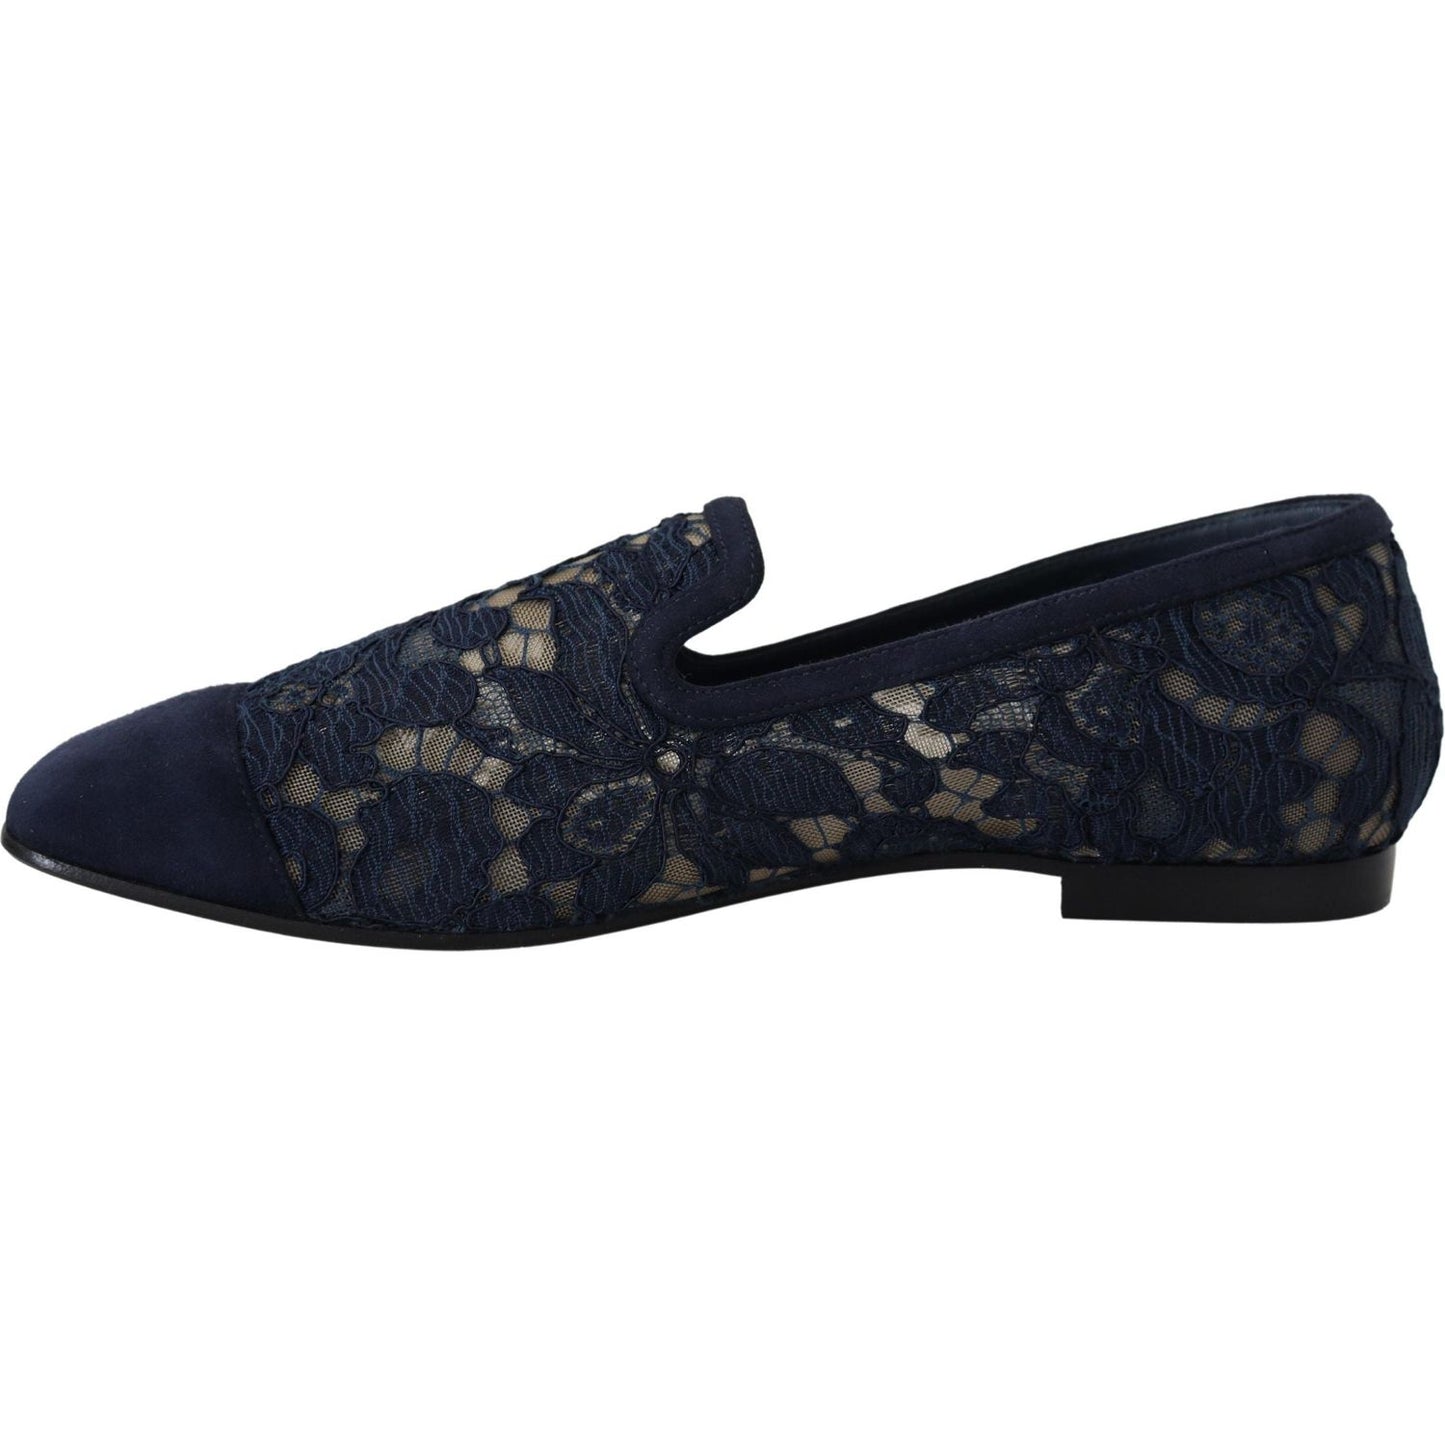 Dolce & Gabbana Elegant Blue Loafers Flats - Summer Chic blue-floral-lace-slip-ons-loafers-flats-shoes IMG_8676-scaled-c52dbbff-988.jpg